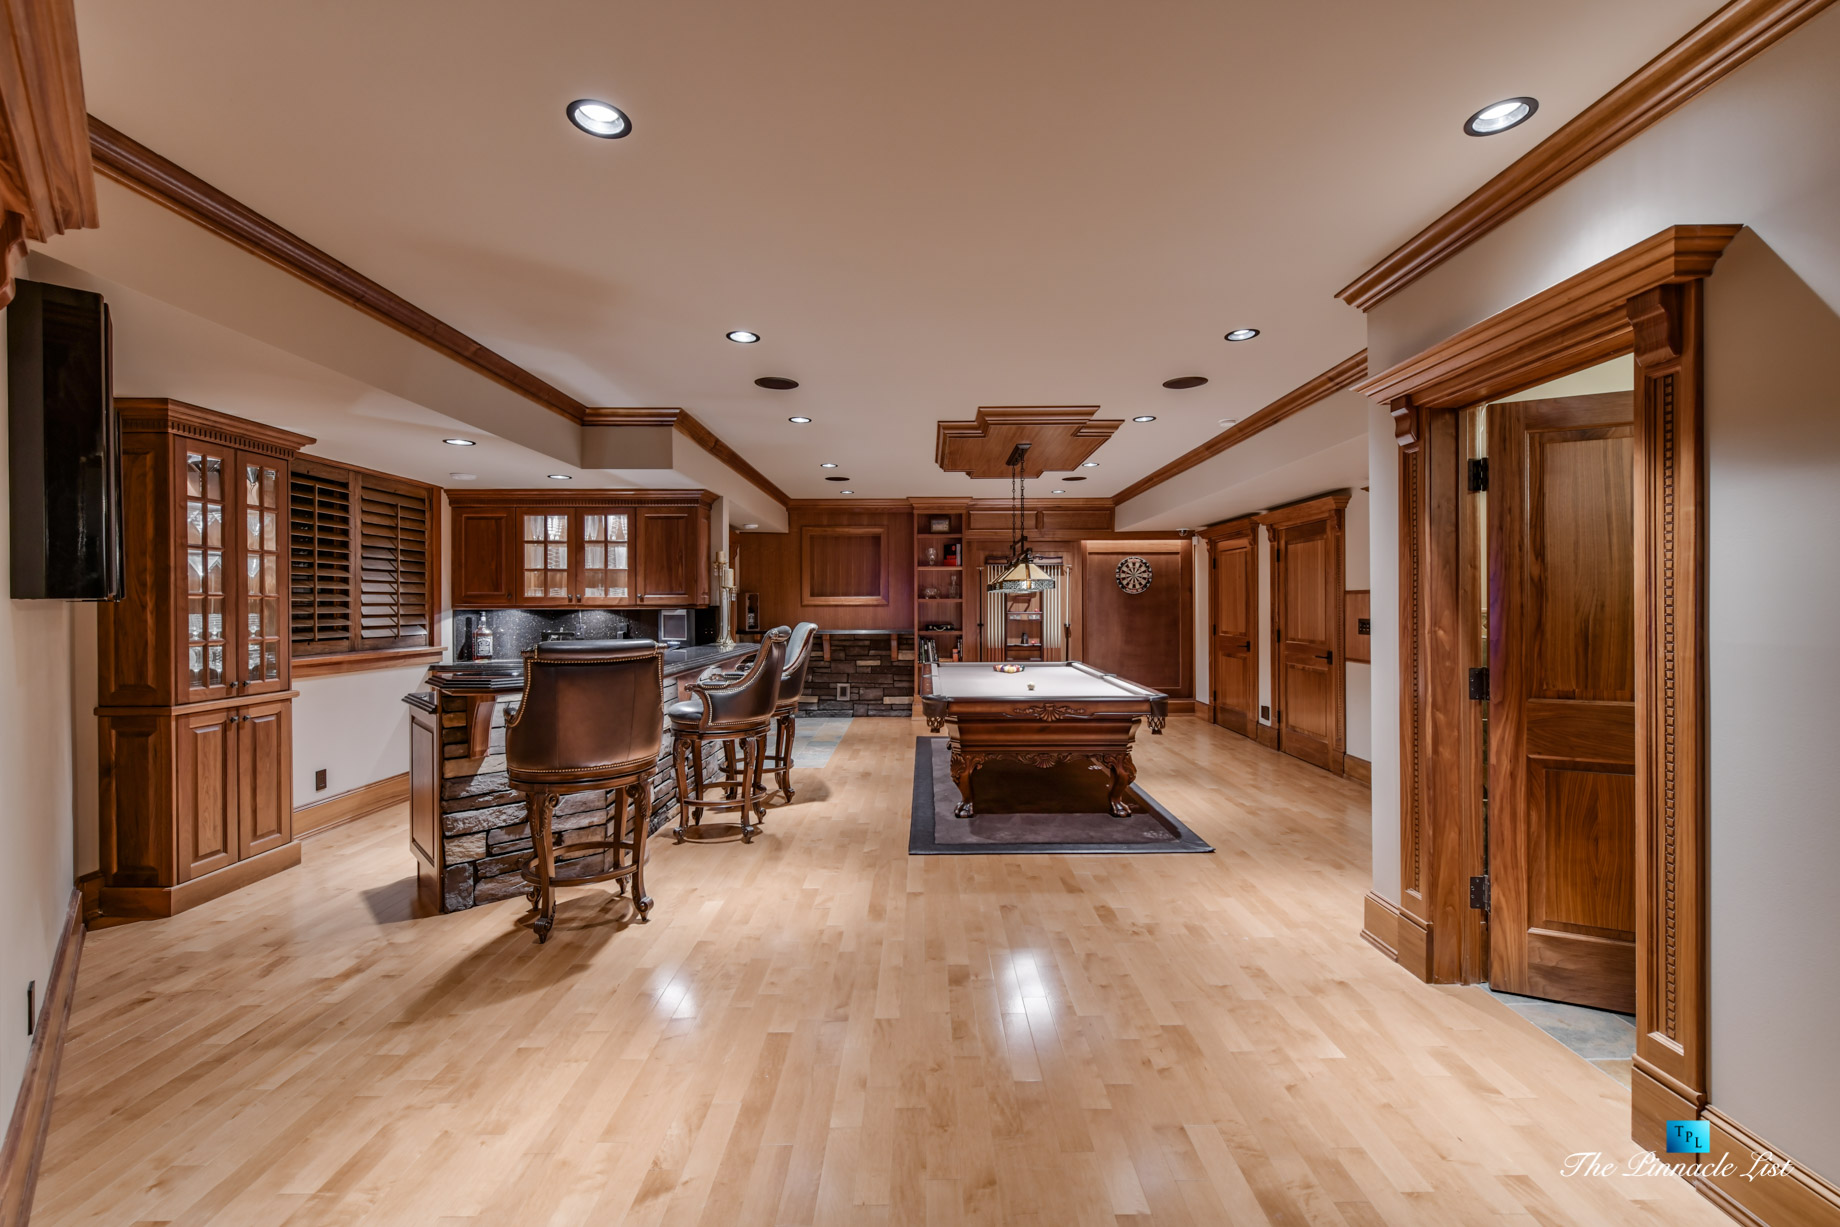 3053 Anmore Creek Way, Anmore, BC, Canada - Basement Man Cave Pool Table and Bar - Luxury Real Estate - Greater Vancouver Home